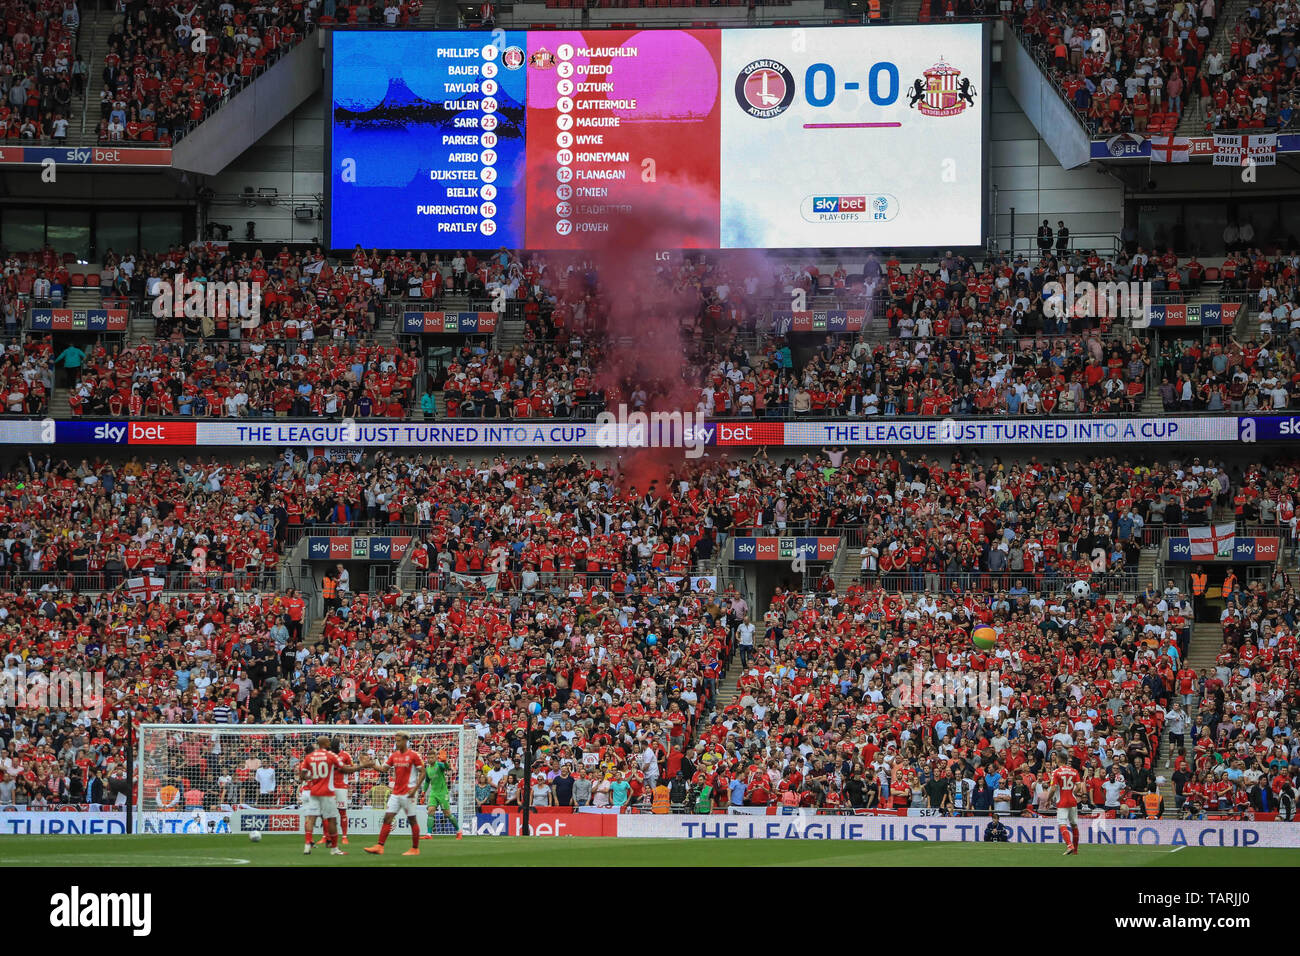 26th May 2019 , Wembley Stadium, London, England ; Sky Bet League 1 Playoff Final , Charlton Athletic vs Sunderland ; Charlton fans fill Wembley    Credit: Mark Cosgrove/News Images    English Football League images are subject to DataCo Licence Stock Photo